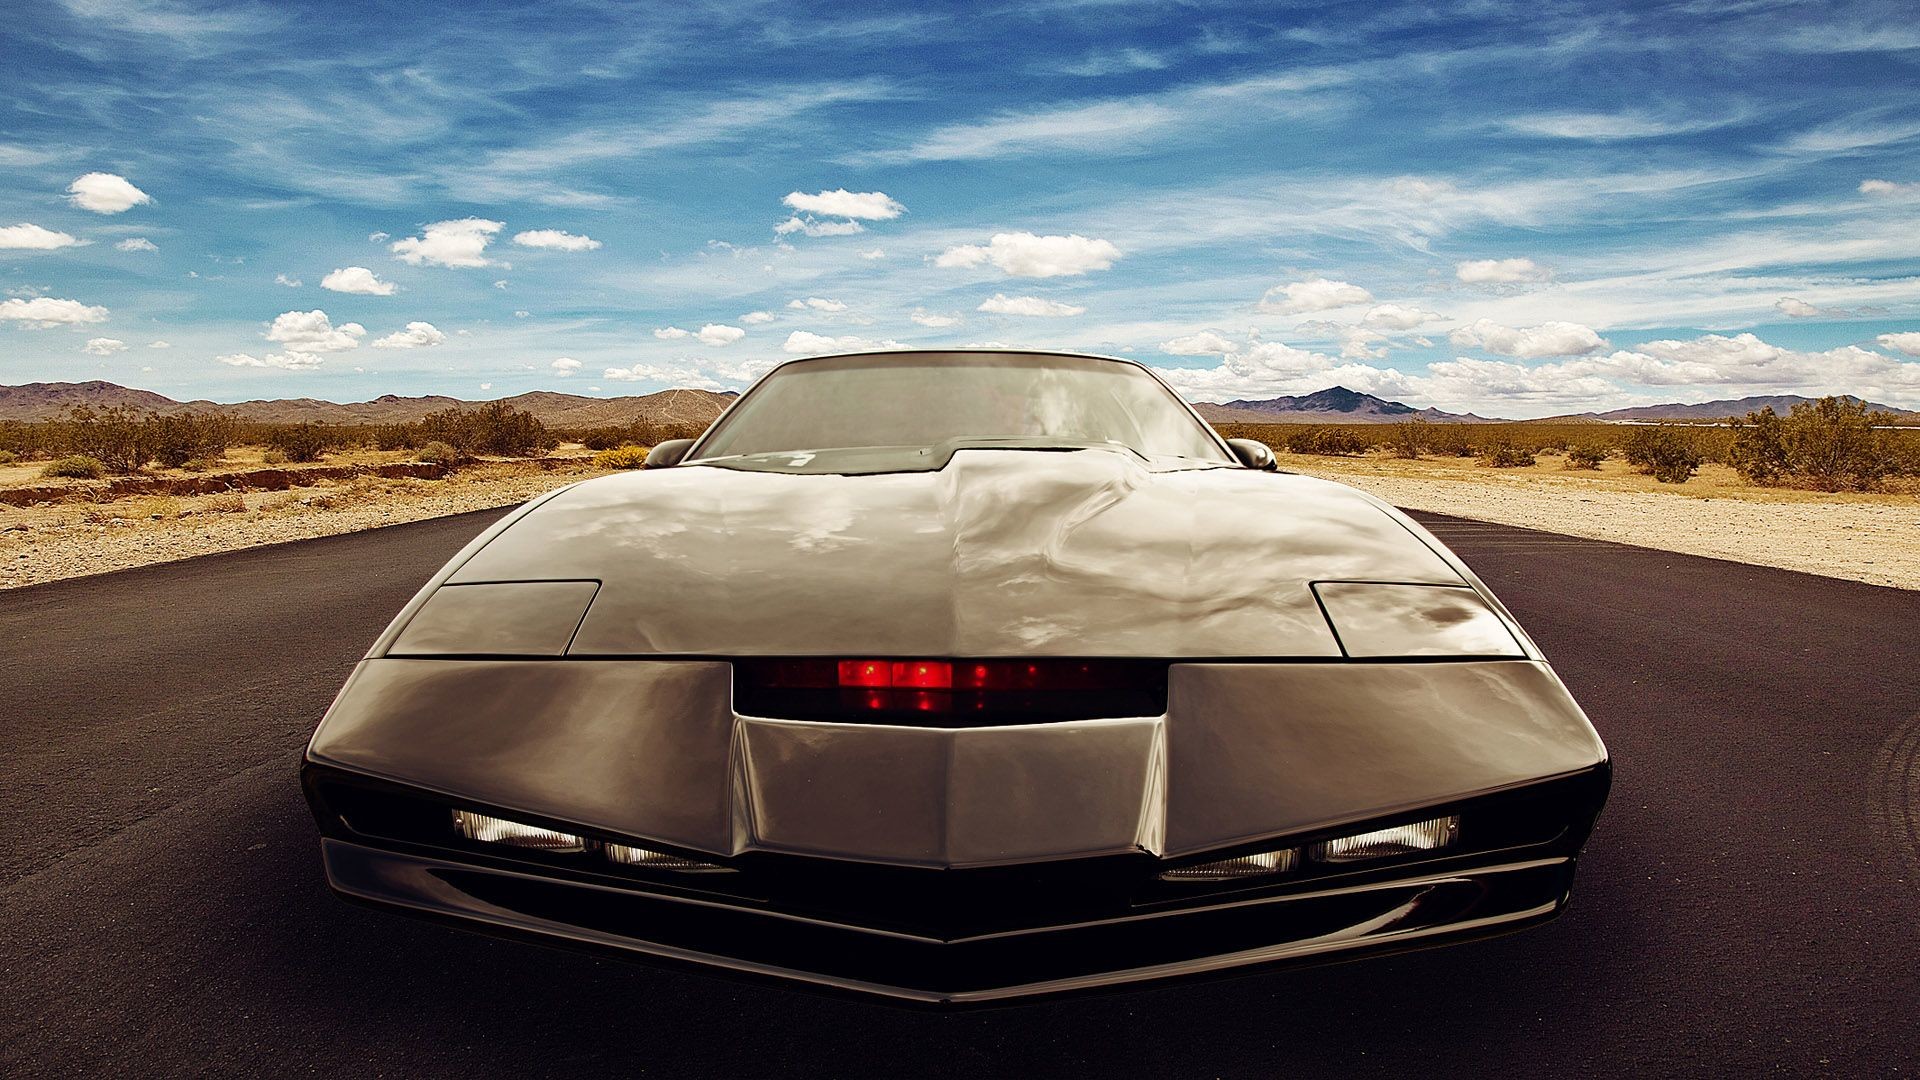 1920x1080 Knight Rider film reboot coming from Fast and Furious director